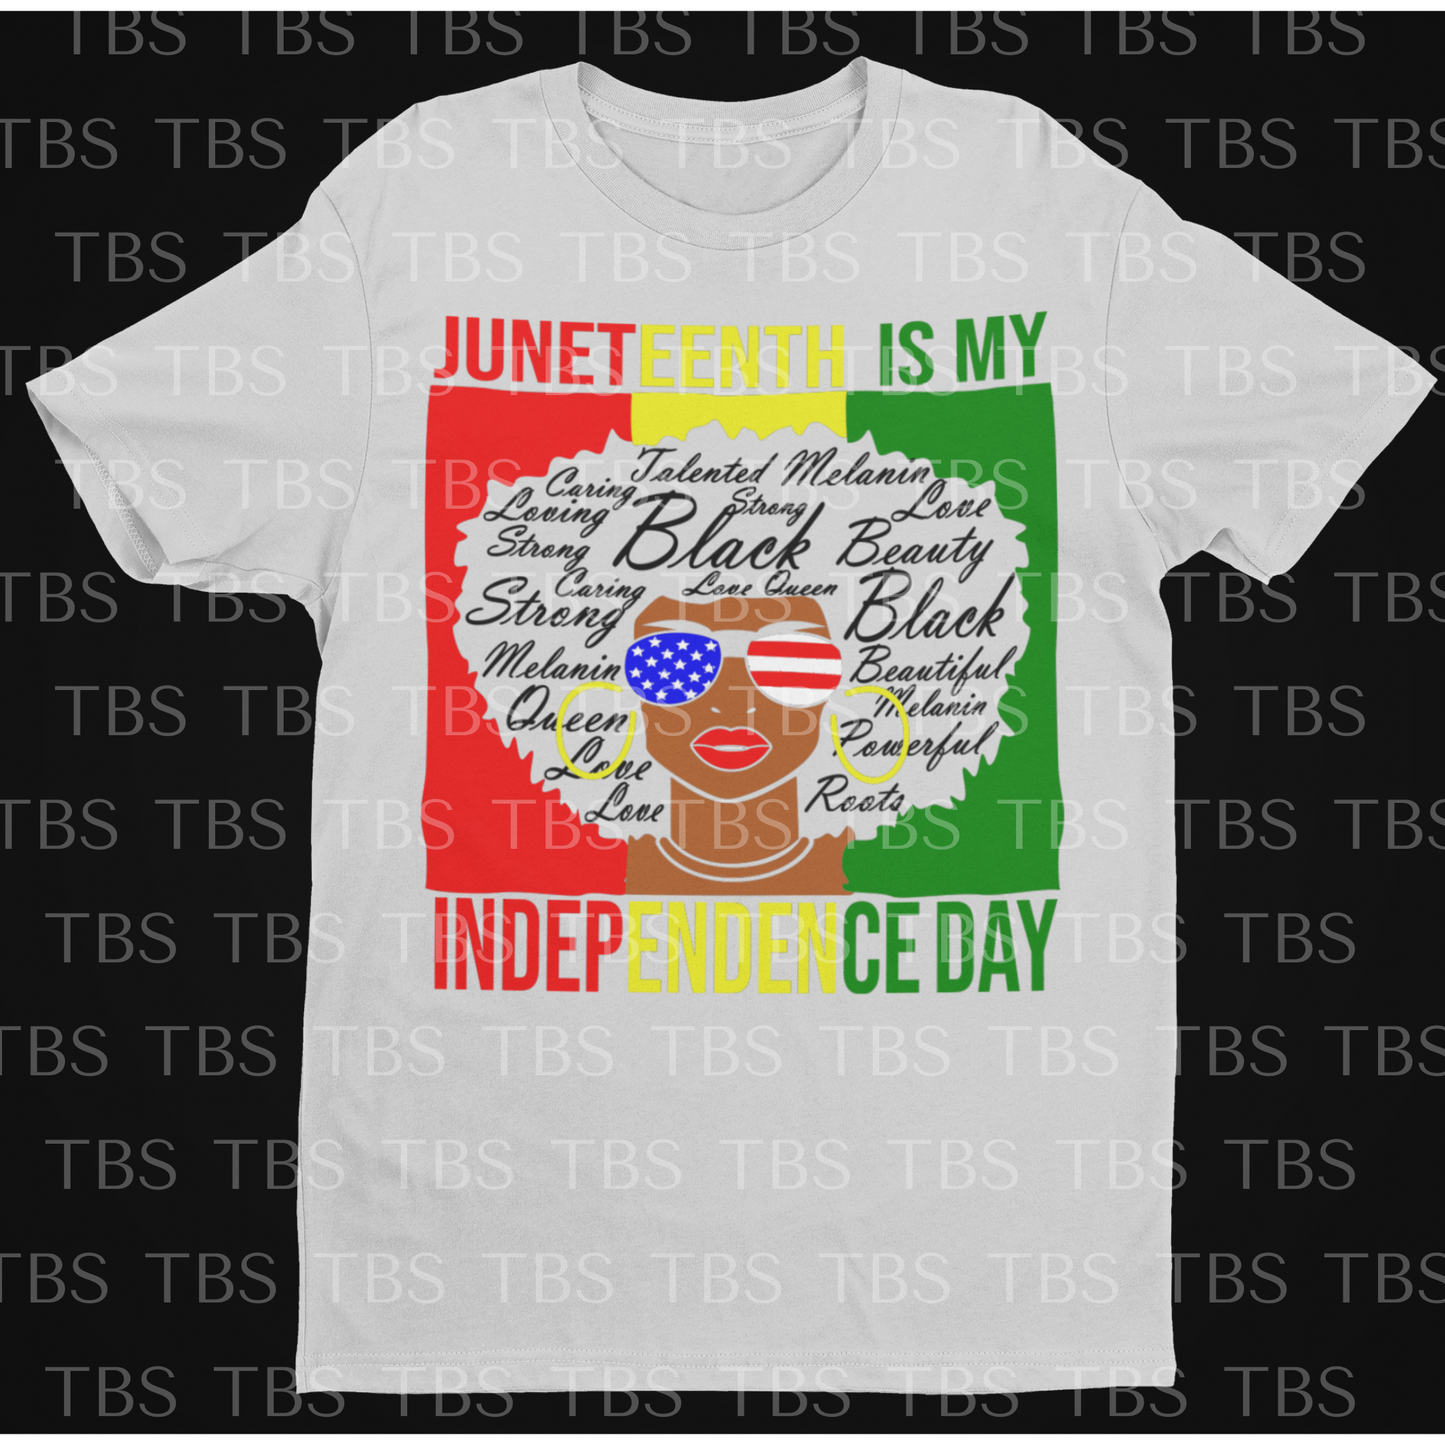 Juneteenth is my Independence Day (Transfer)